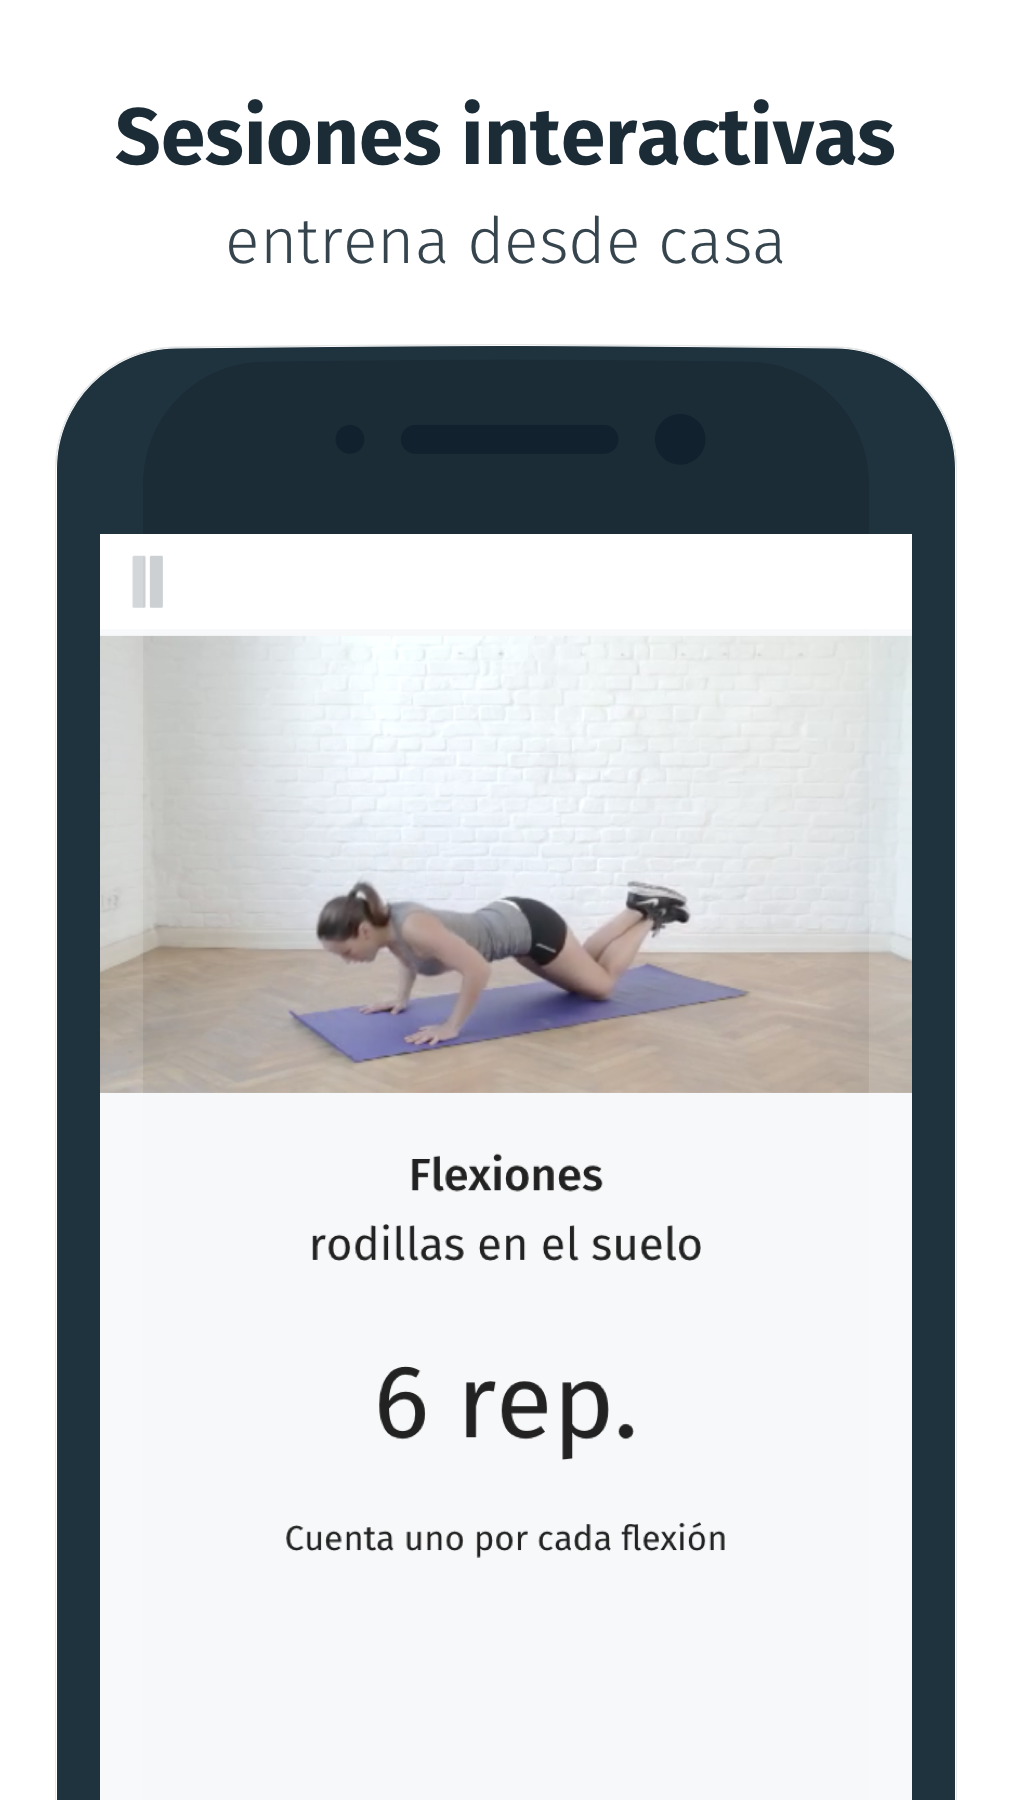 Android application 8fit Workouts & Meal Planner screenshort